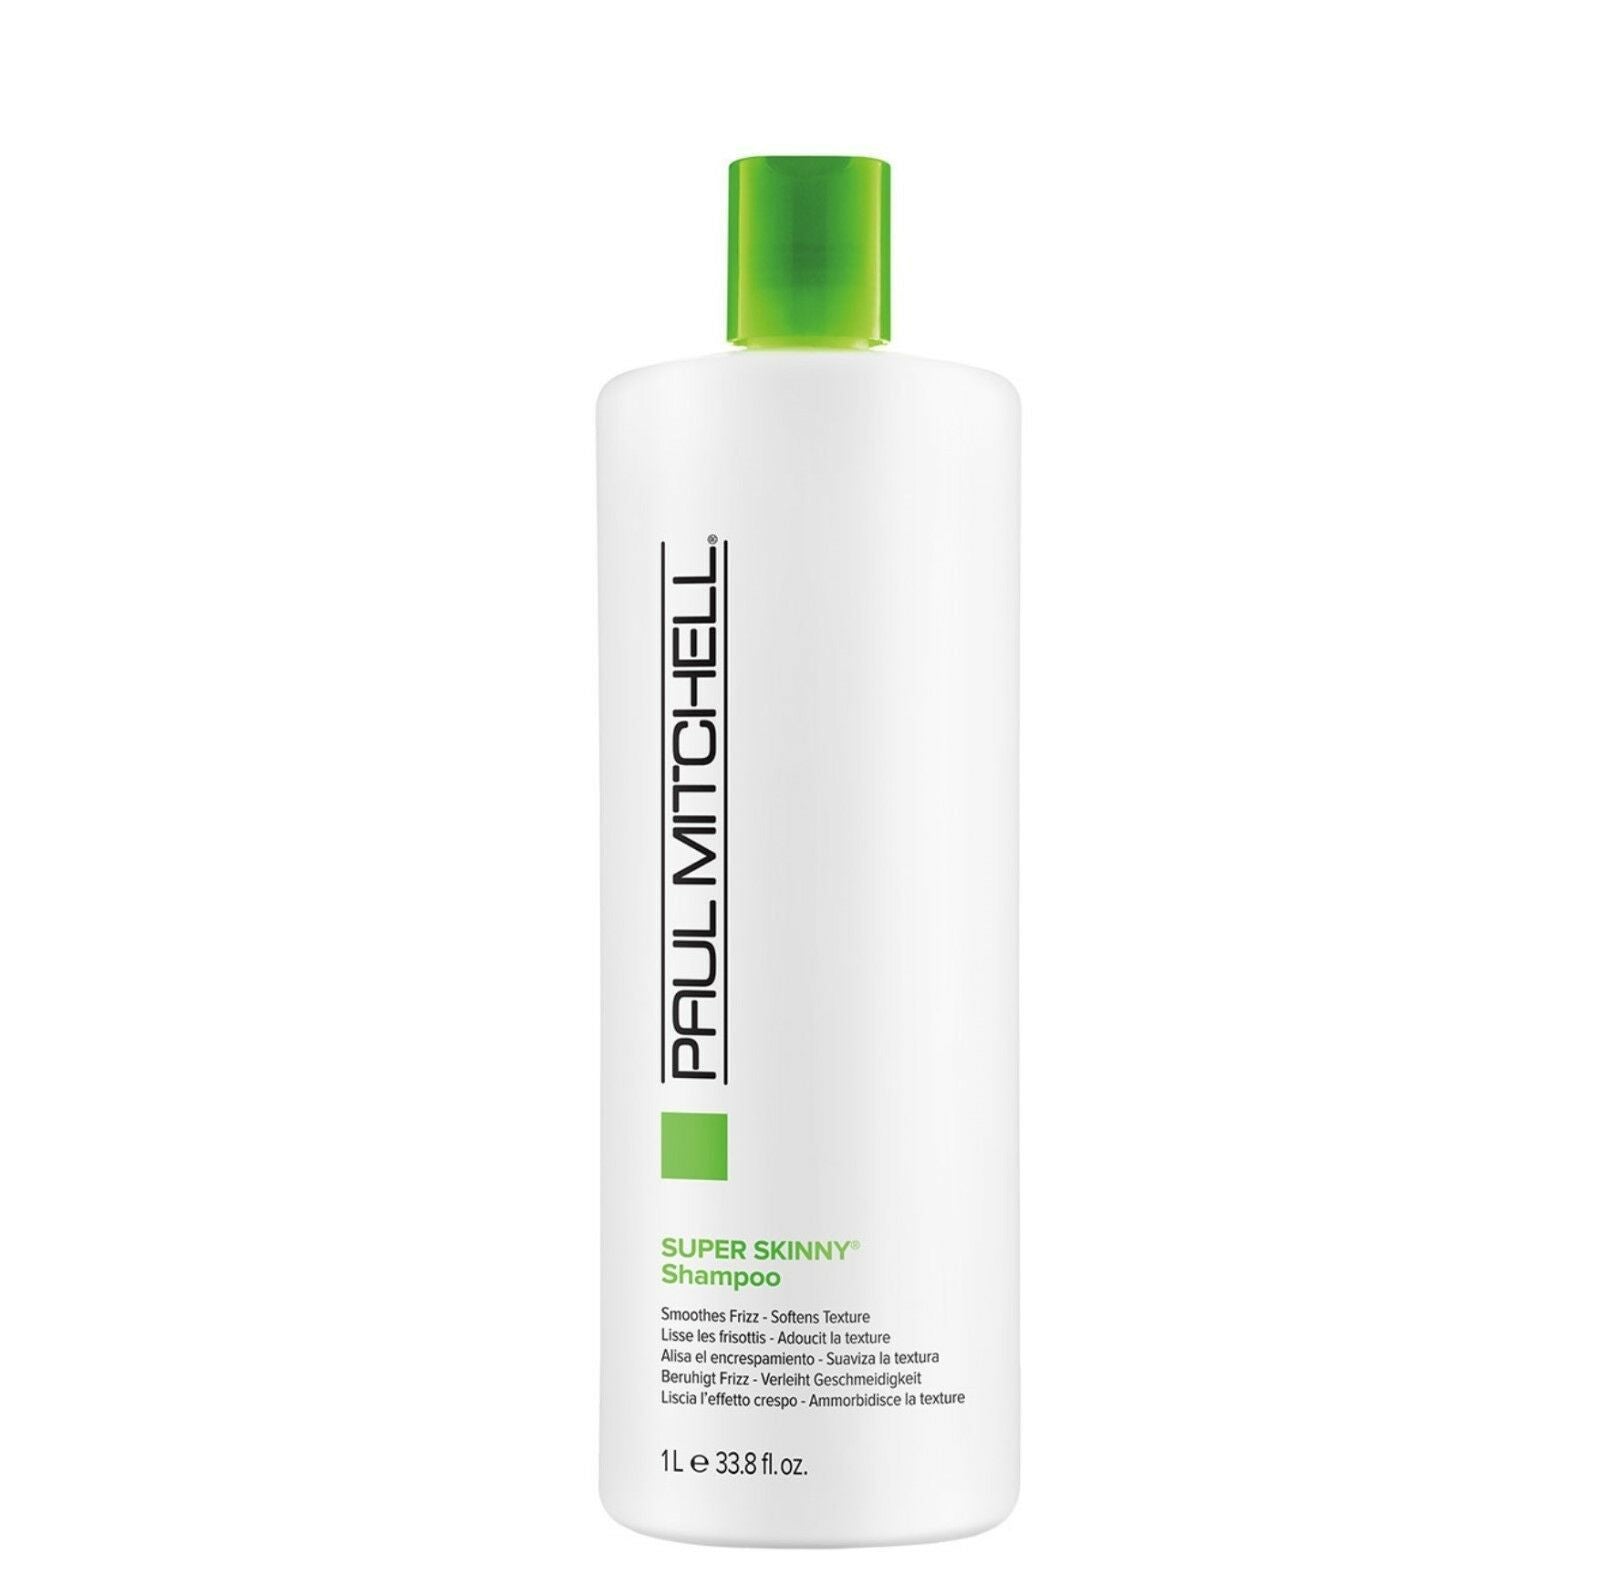 iaahhaircare,Paul Mitchell SUPER SKINNY Smoothes Frizz Shampoo 1lt,Shampoos & Conditioners,Super Skinny Paul Mitchell